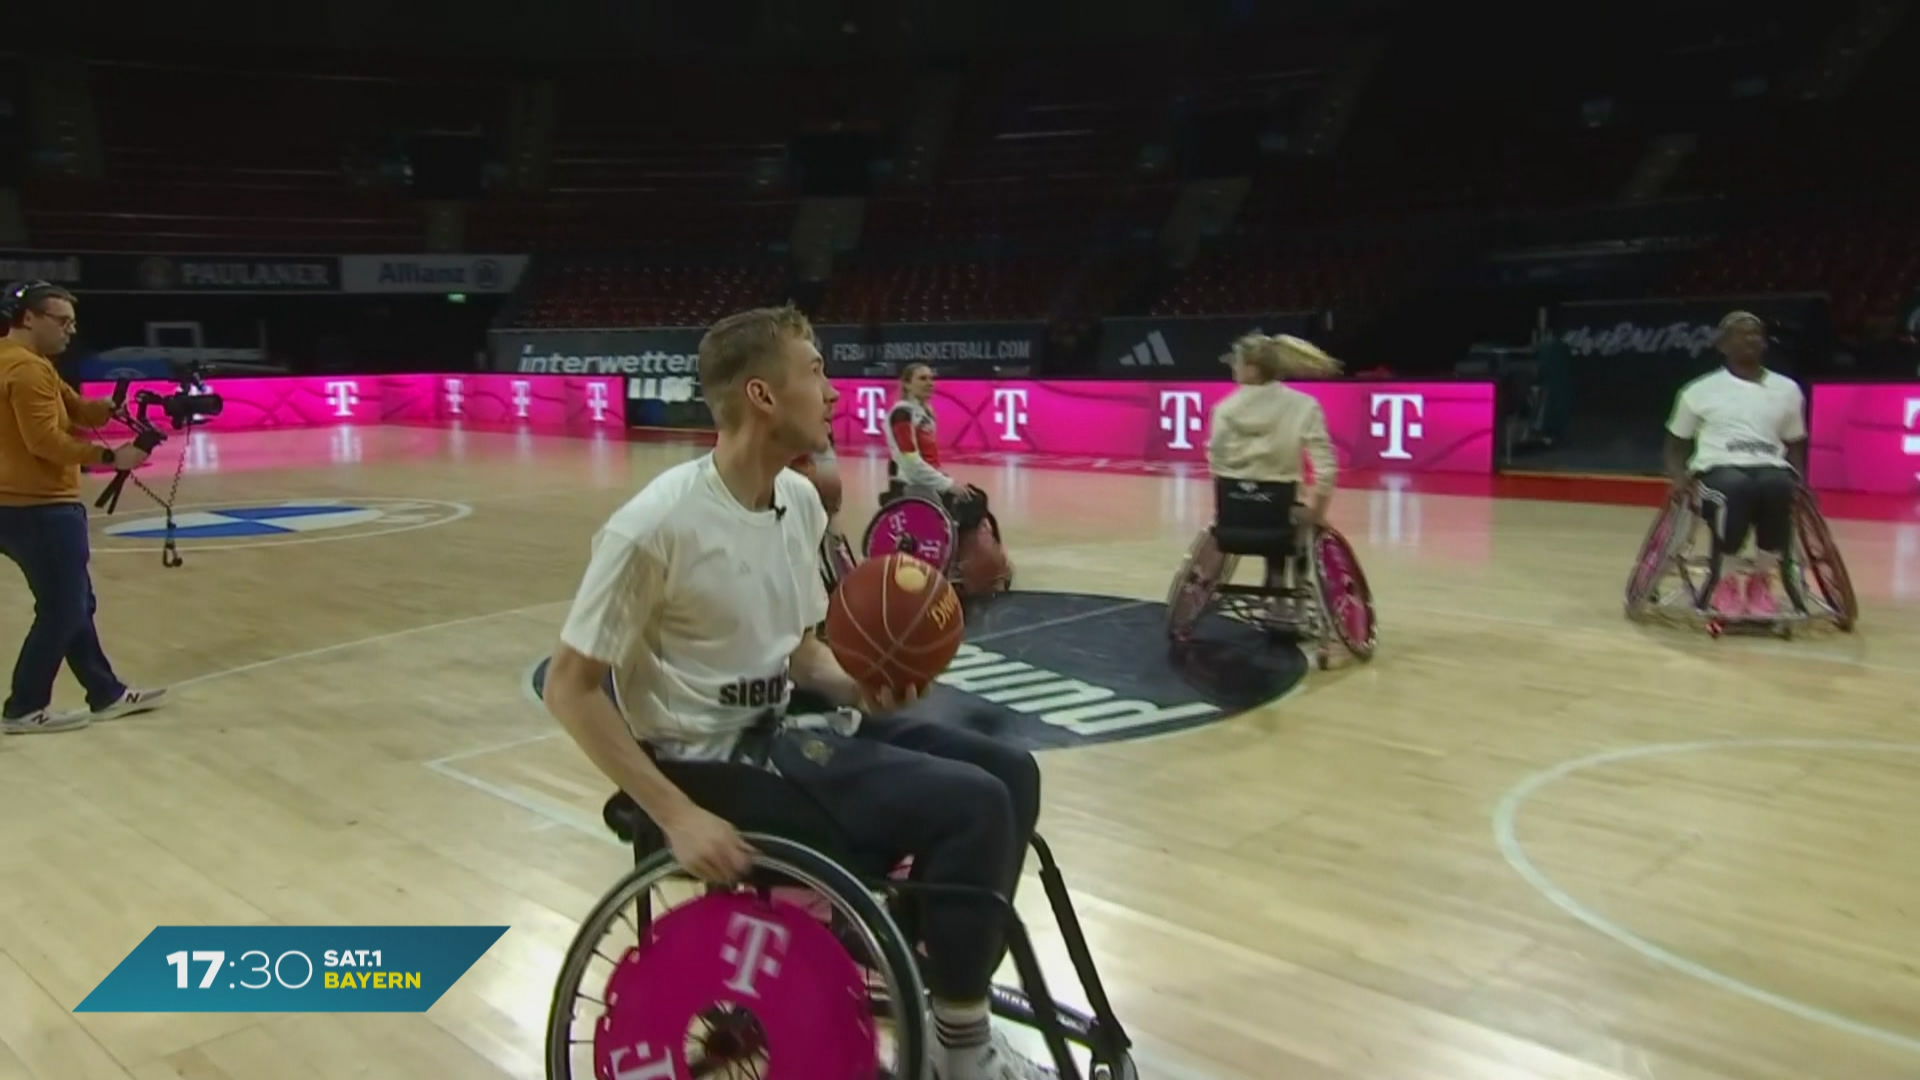 Wheelchair basketball: FC Bayern world champions try out the sport on wheels